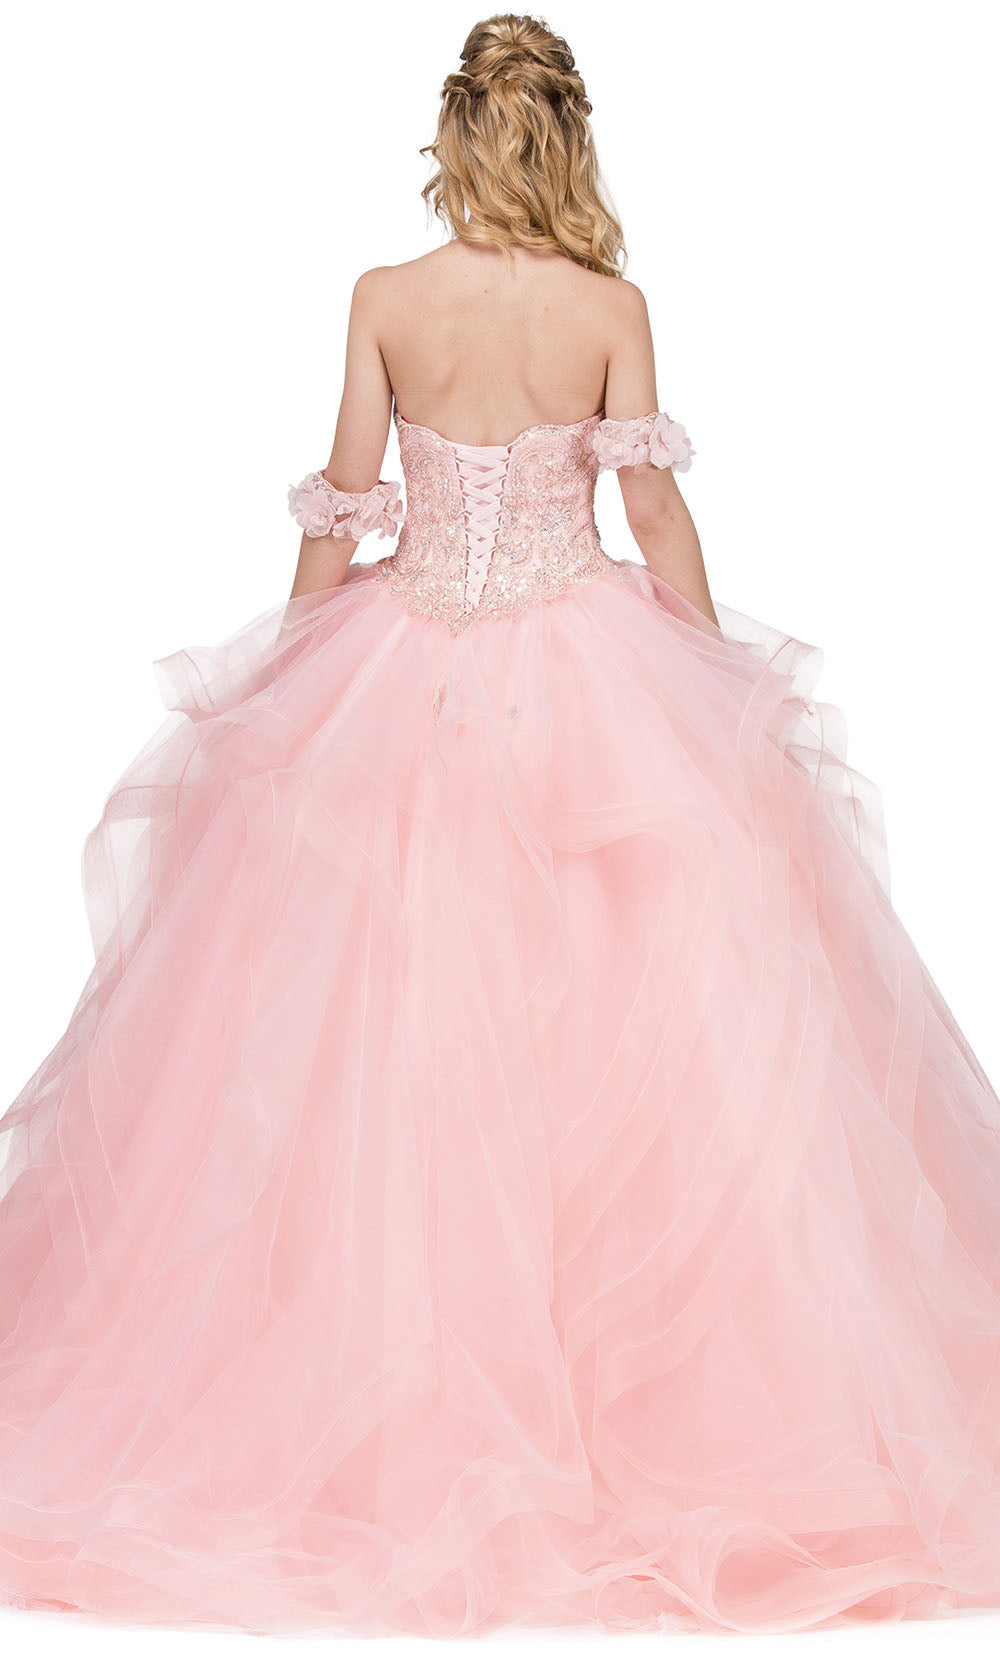 Dancing Queen - 1301 Embroidered Sweetheart Ruffled Ballgown In Pink